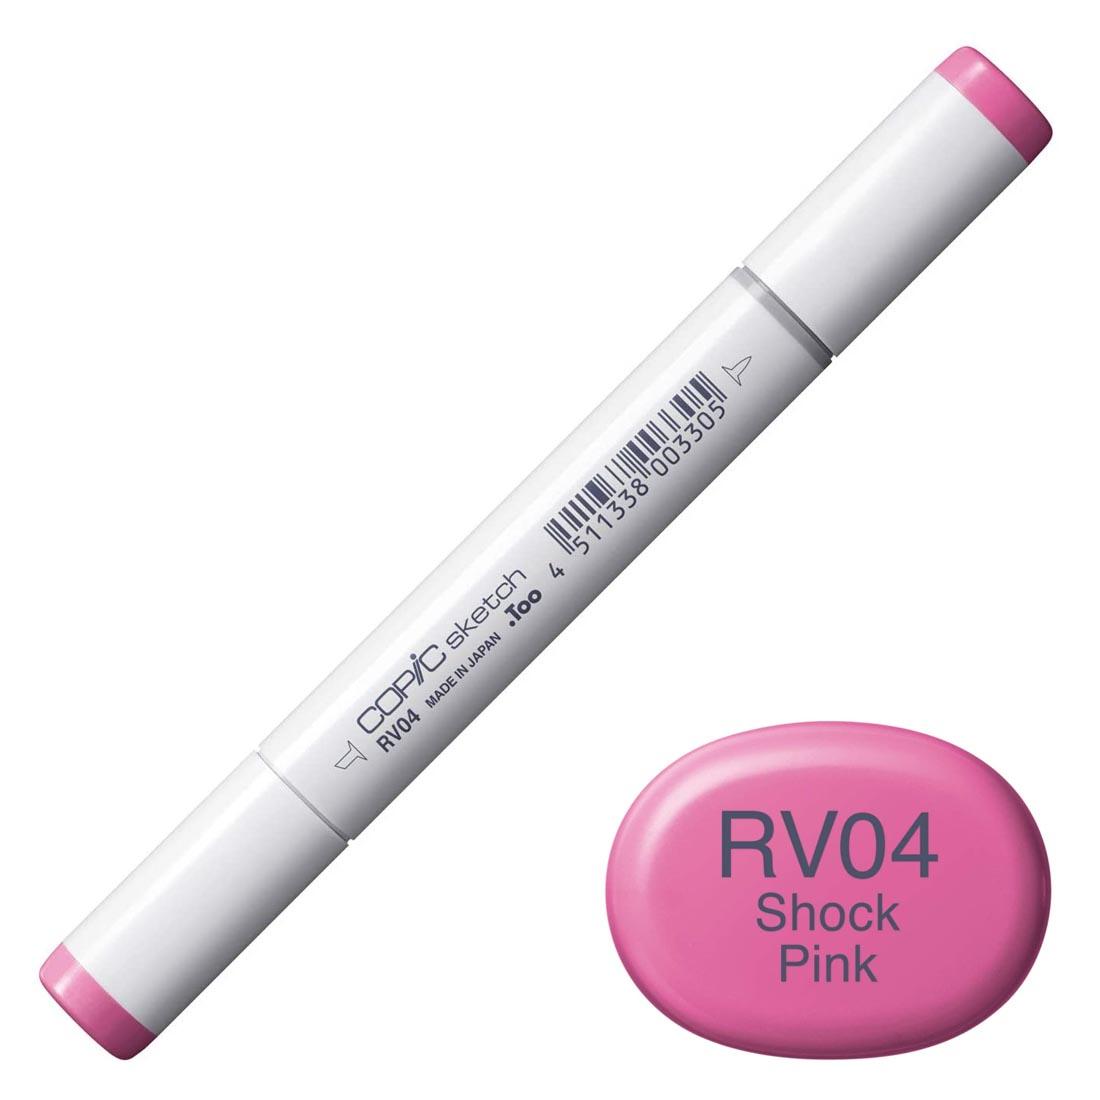 COPIC Sketch Marker with a color swatch and text of RV04 Shock Pink